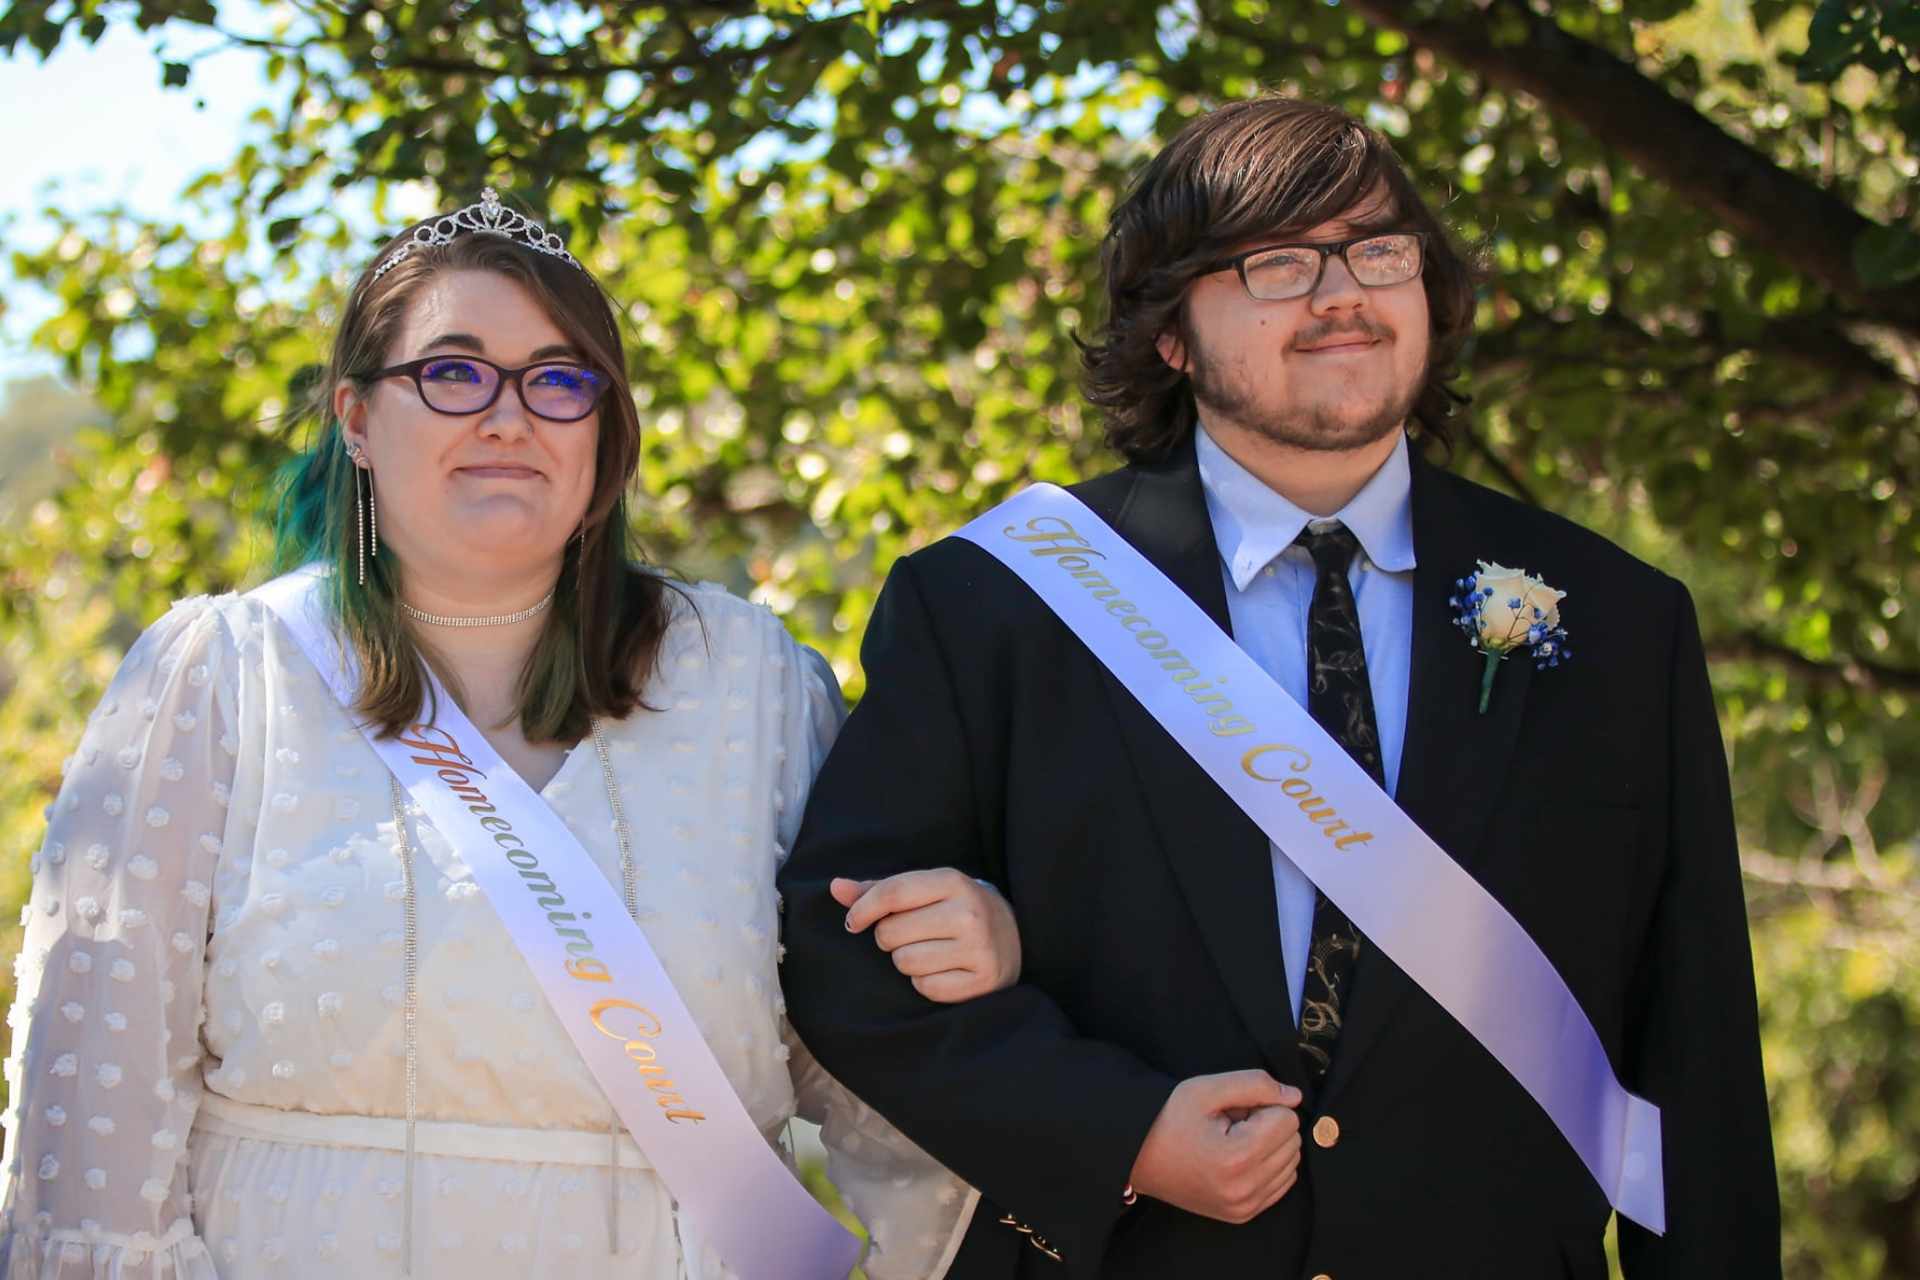 A member of the Glenville State College Homecoming Court as a Senior Princess, Keelin Howes is joined at the Coronation Ceremony by her escort, Joe Lutsy.